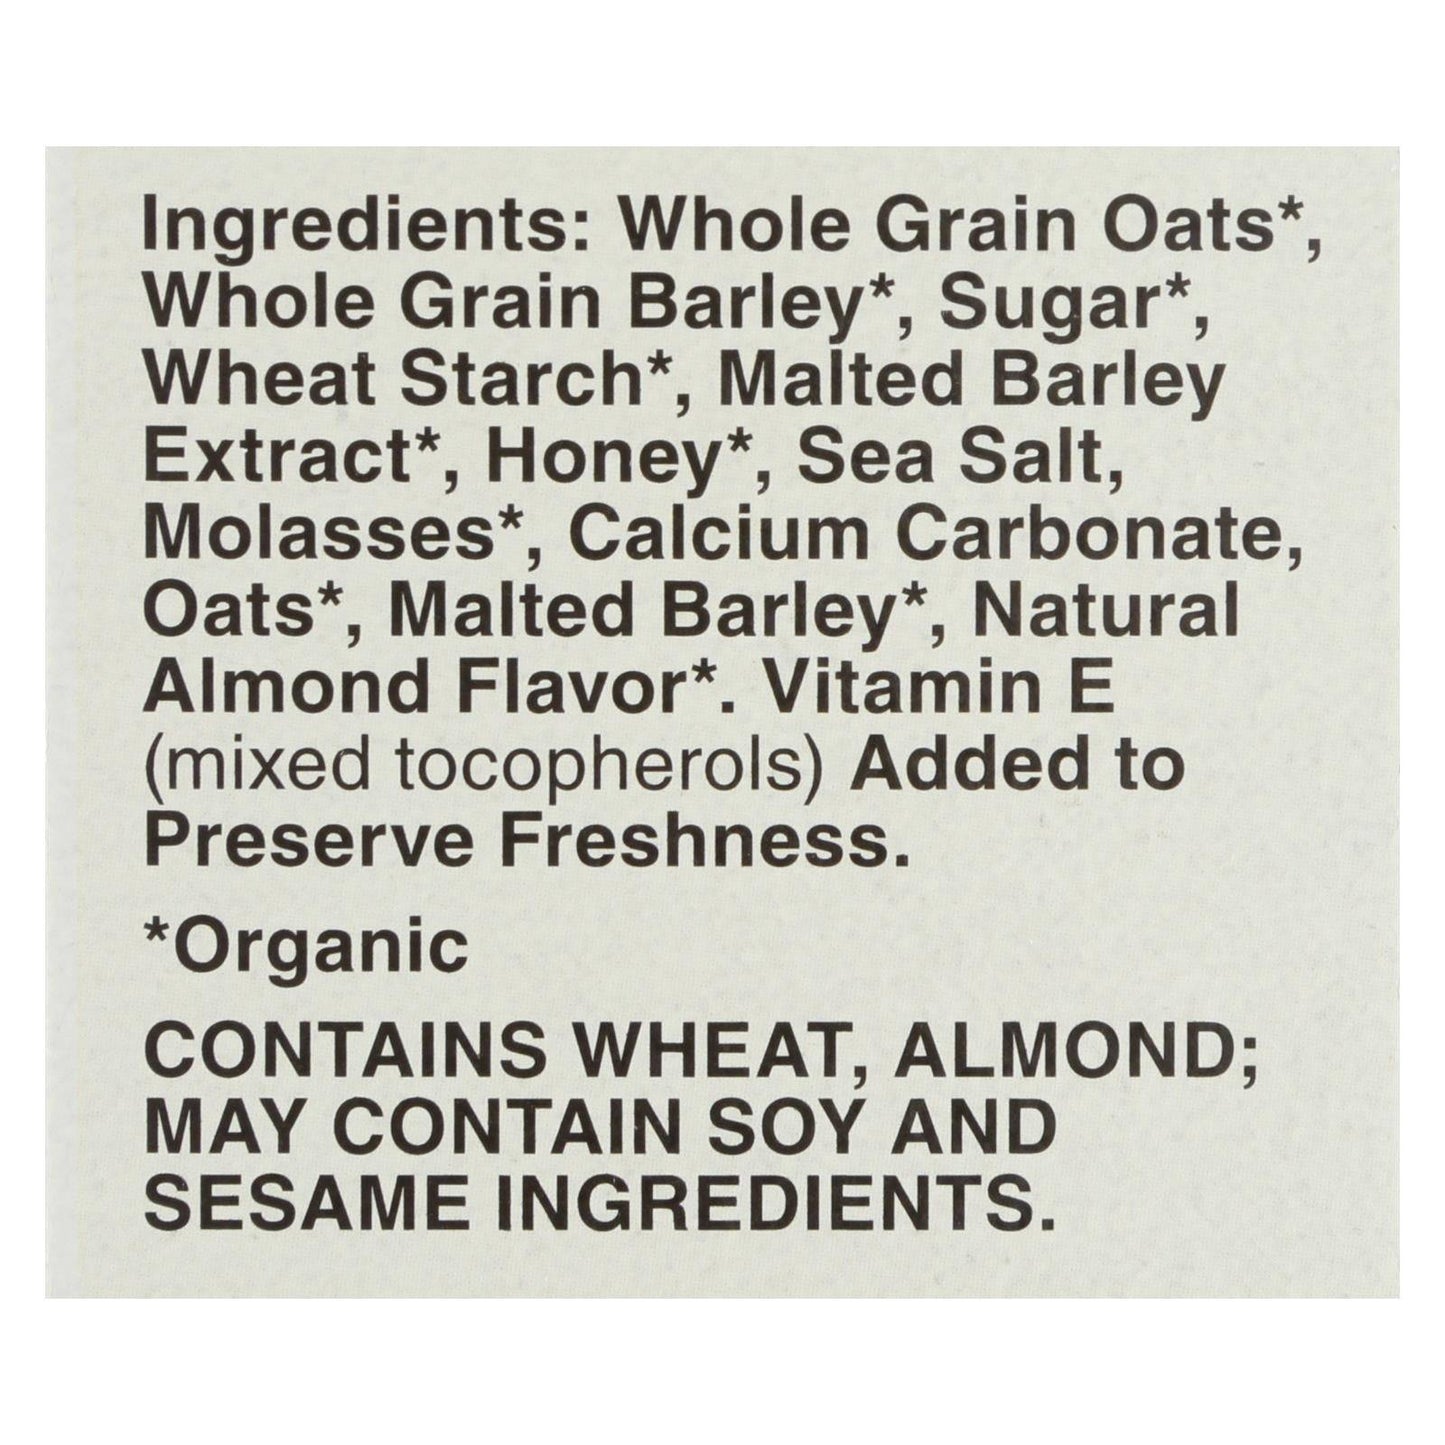 Cascadian Farm Organic Cereal - Honey Nut Os - Case Of 12 - 9.5 Oz | OnlyNaturals.us